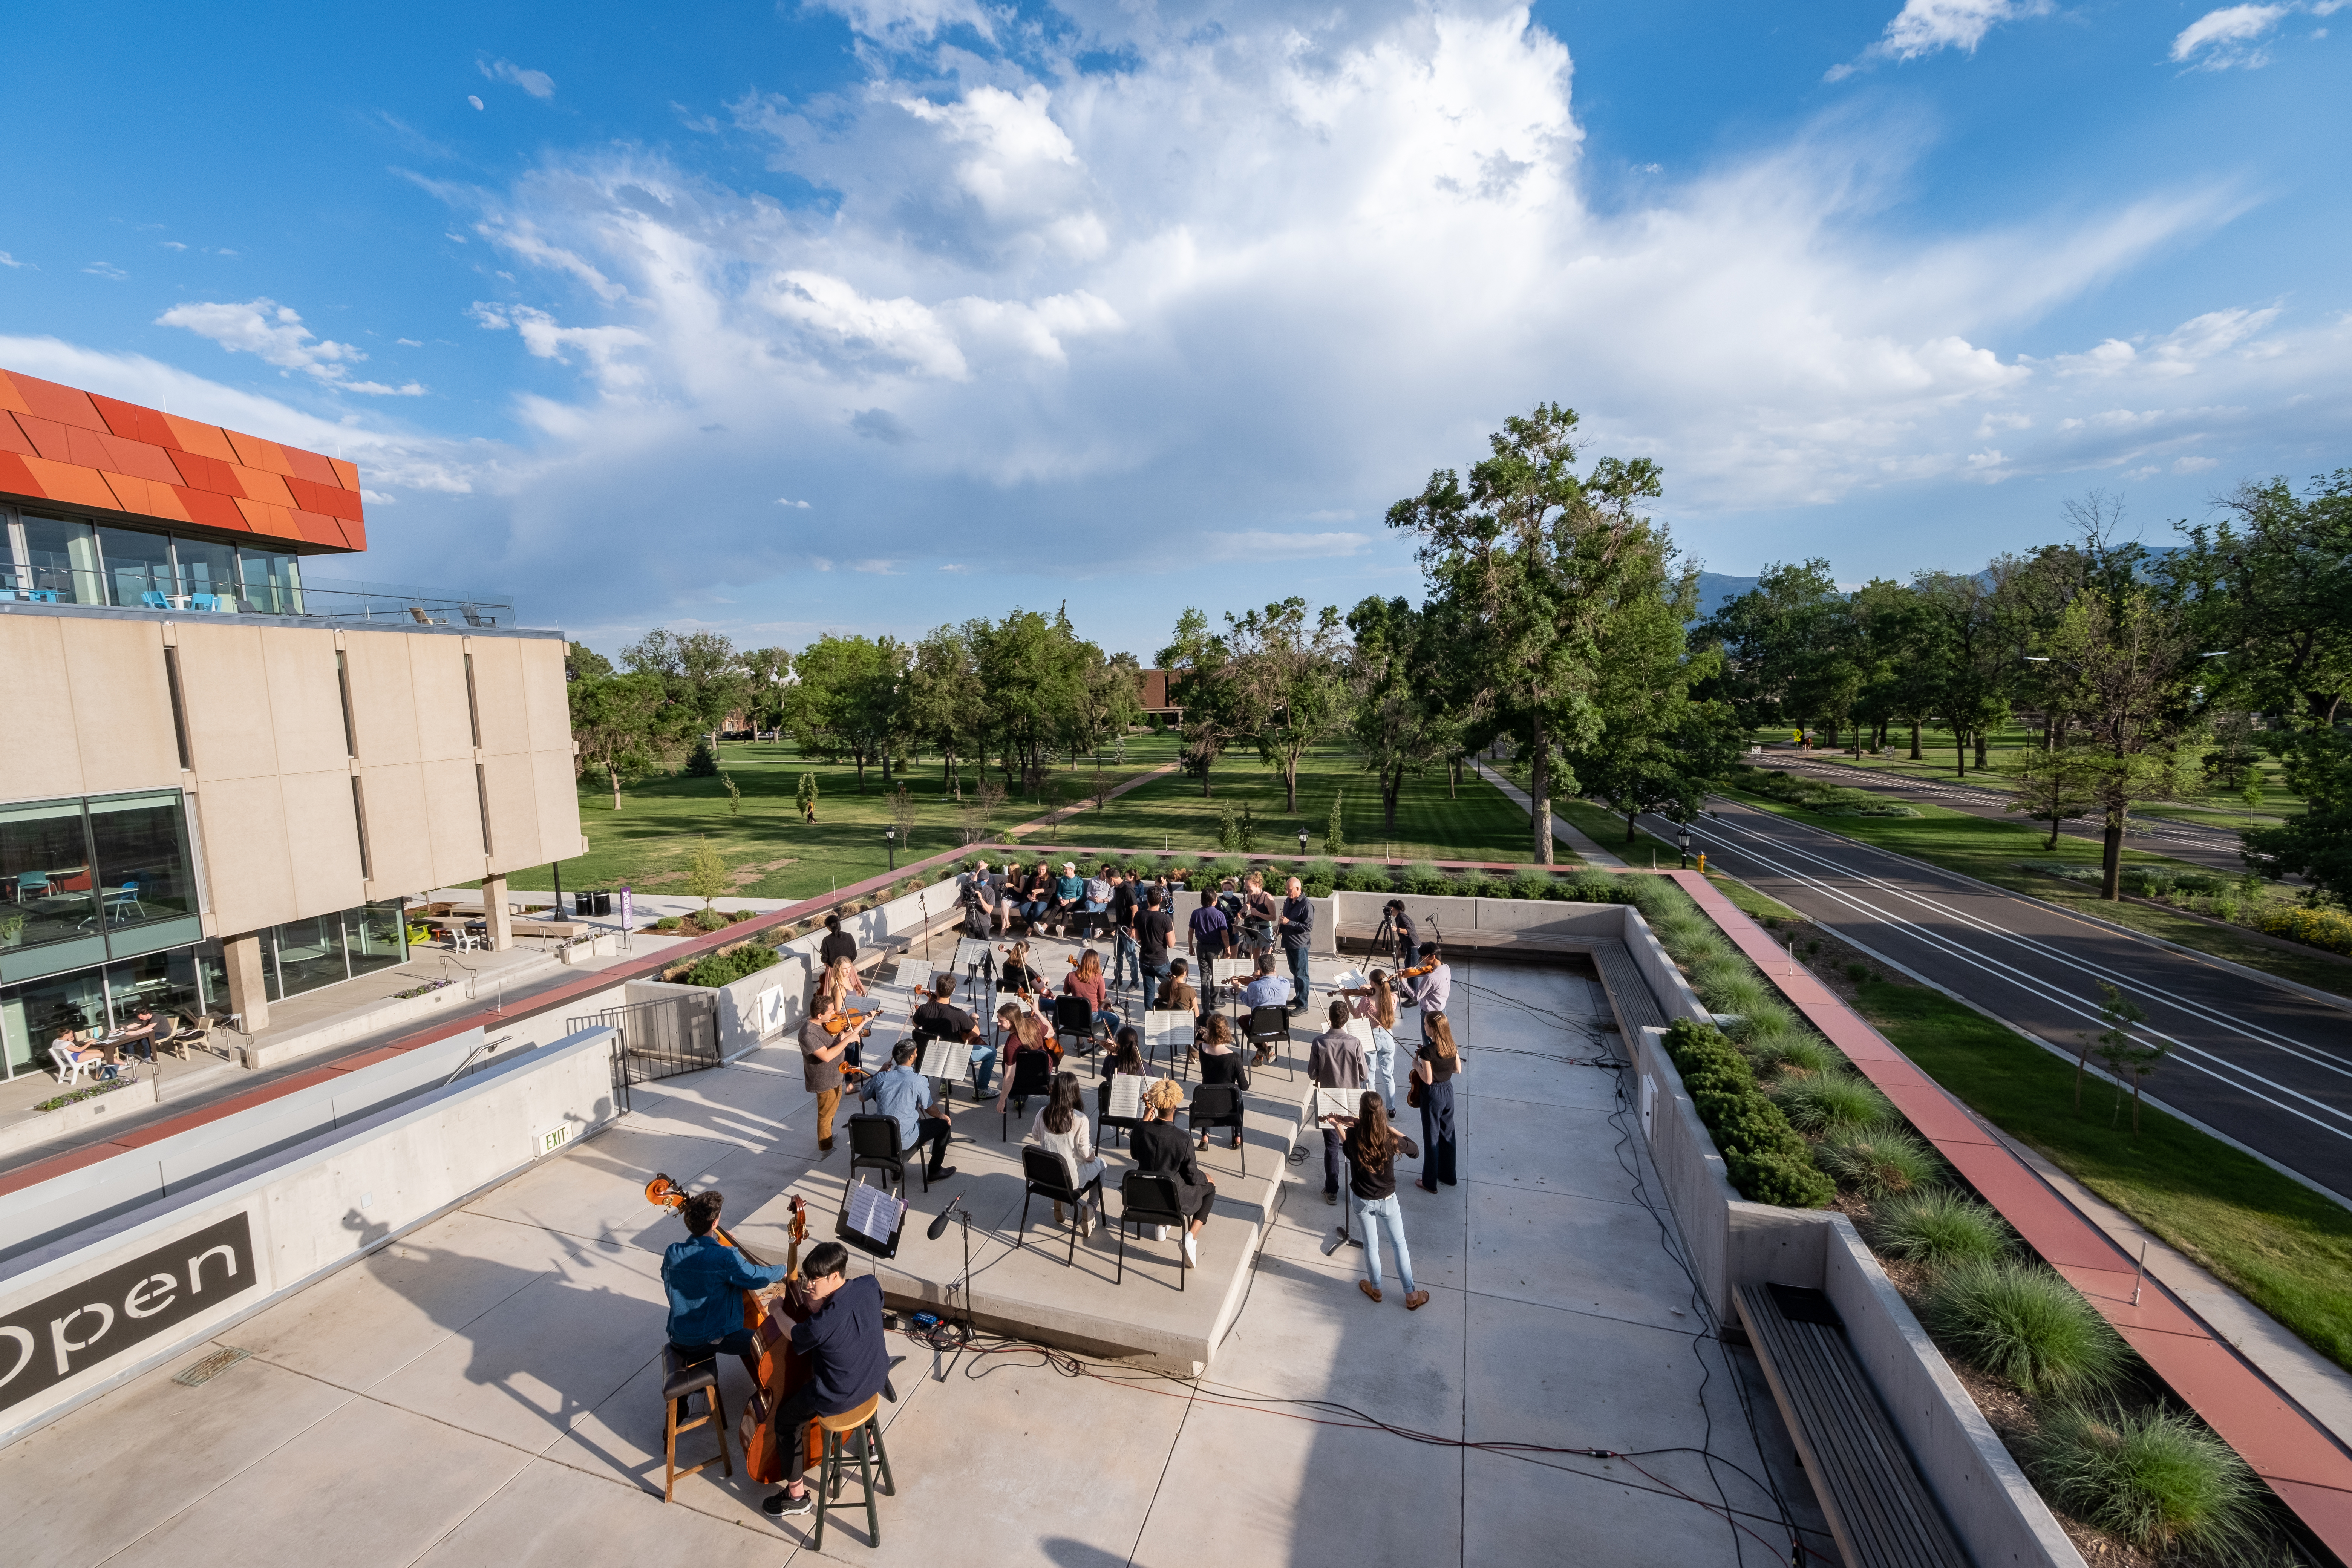 Playing Copland on the Tutt Library roof <span class="cc-gallery-credit">[Josh Birndorf]</span>